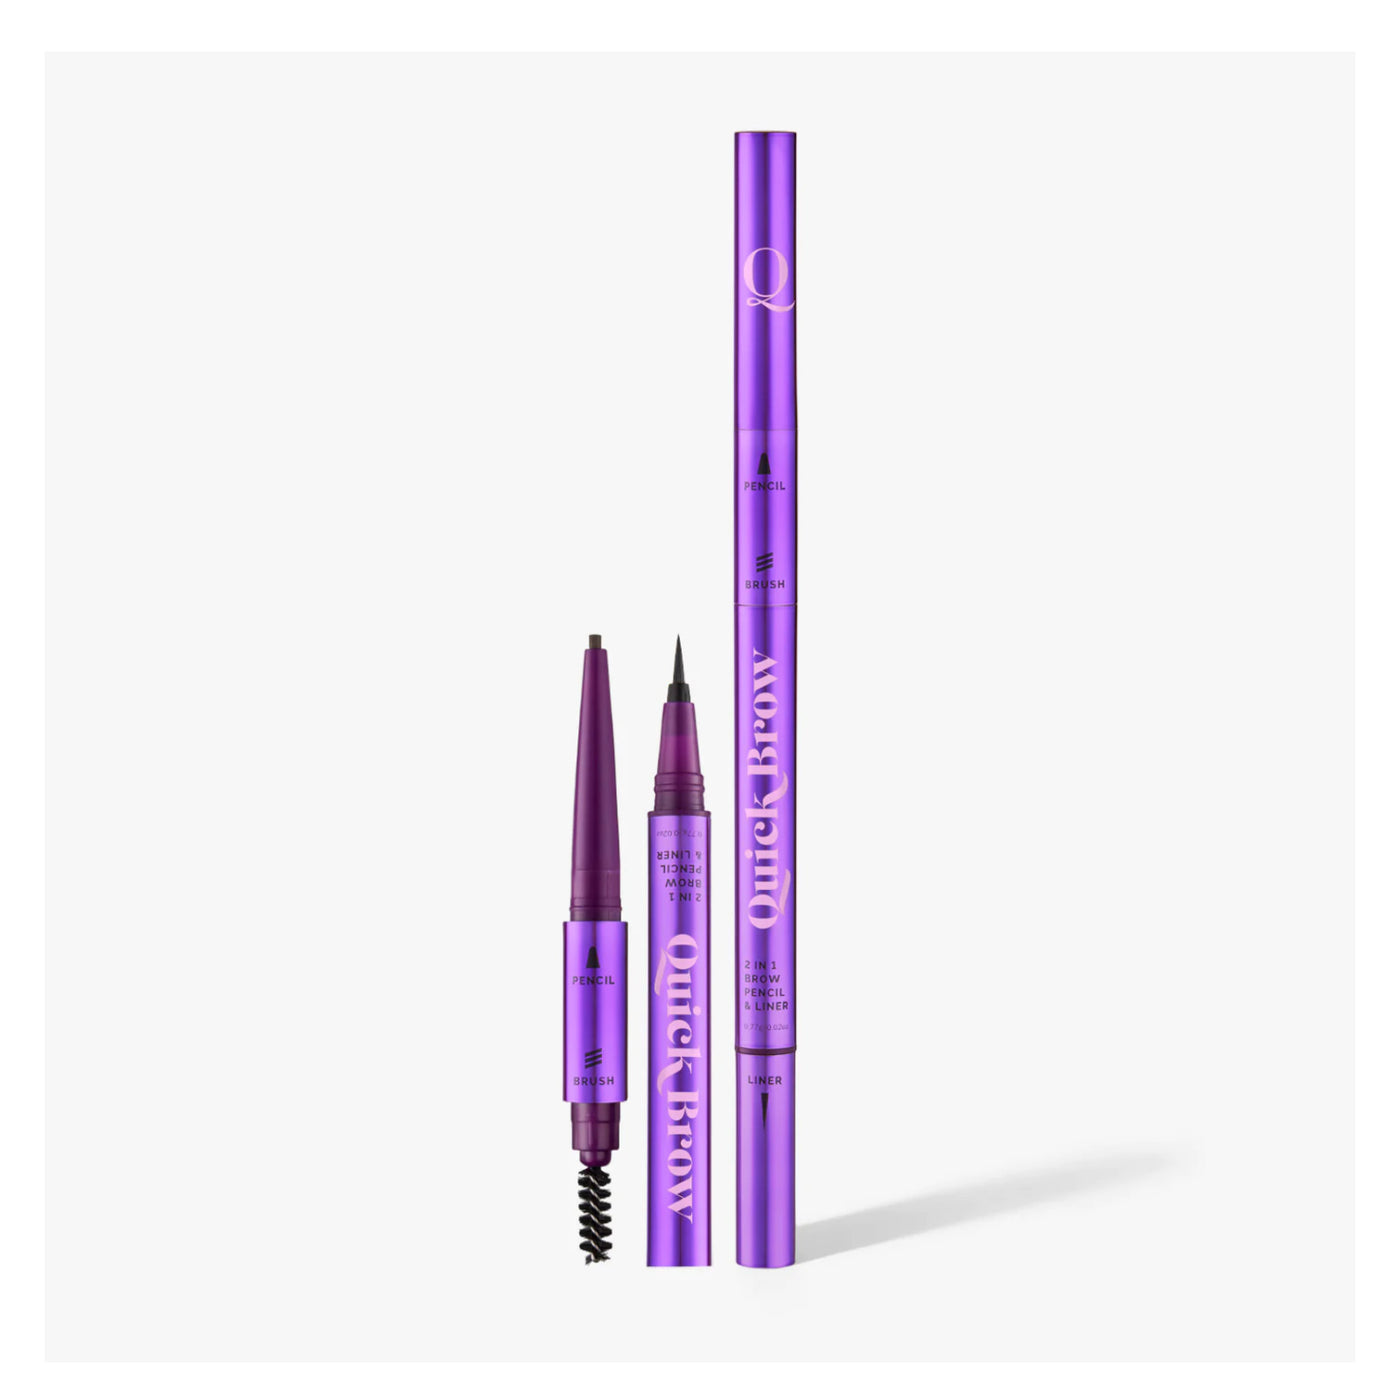 The Quick Flick Quick Brow 2 in 1 Brow Pencil and Liner - Medium